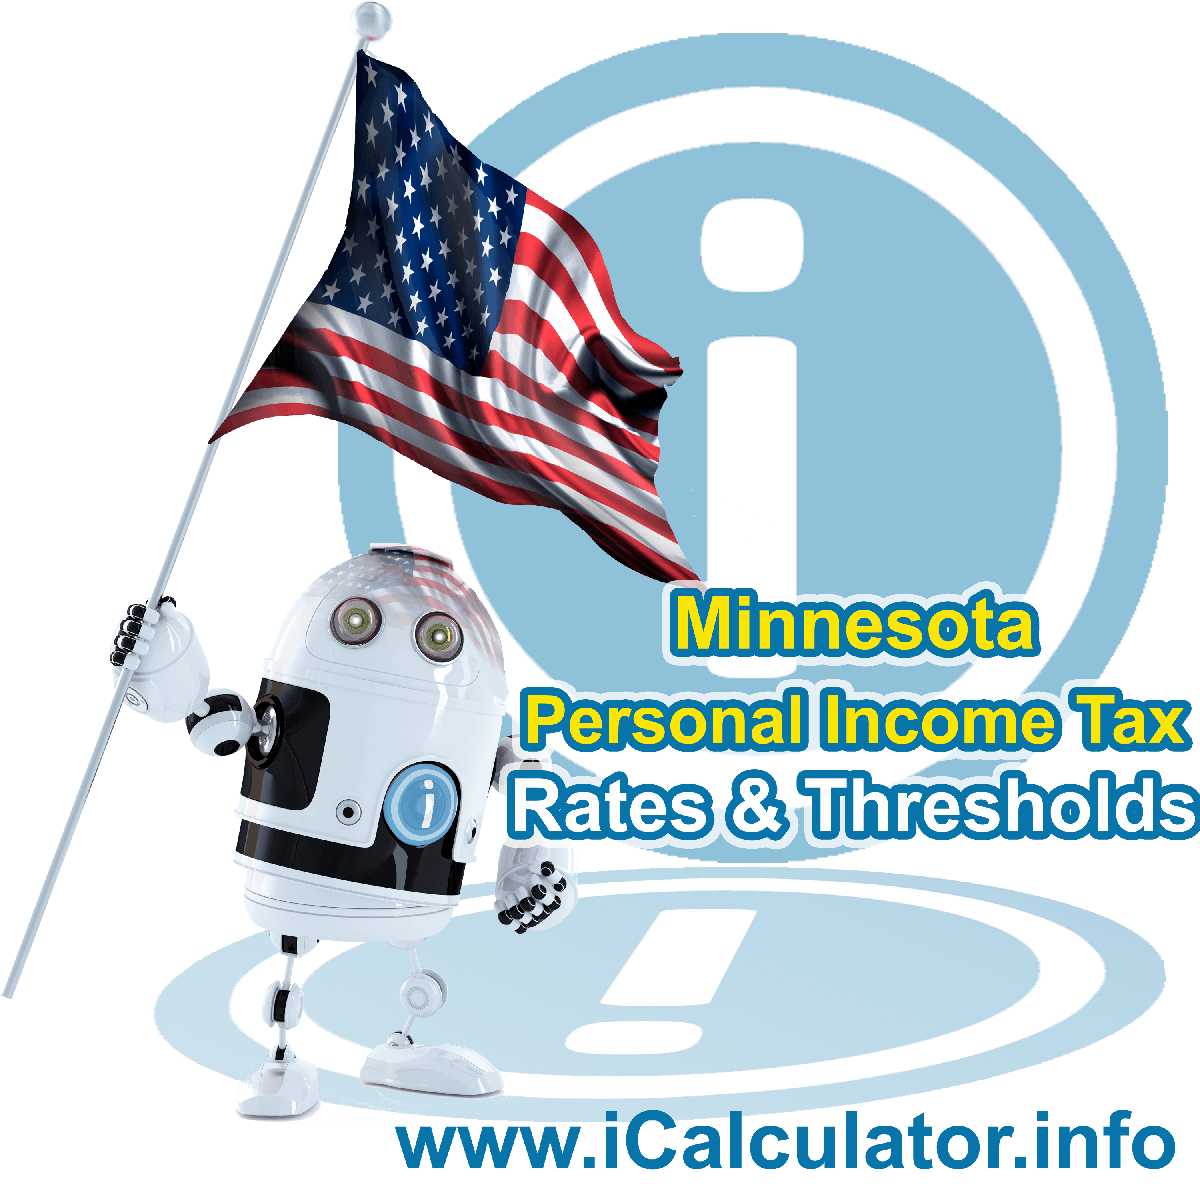 Minnesota State Tax Tables 2021. This image displays details of the Minnesota State Tax Tables for the 2021 tax return year which is provided in support of the 2021 US Tax Calculator